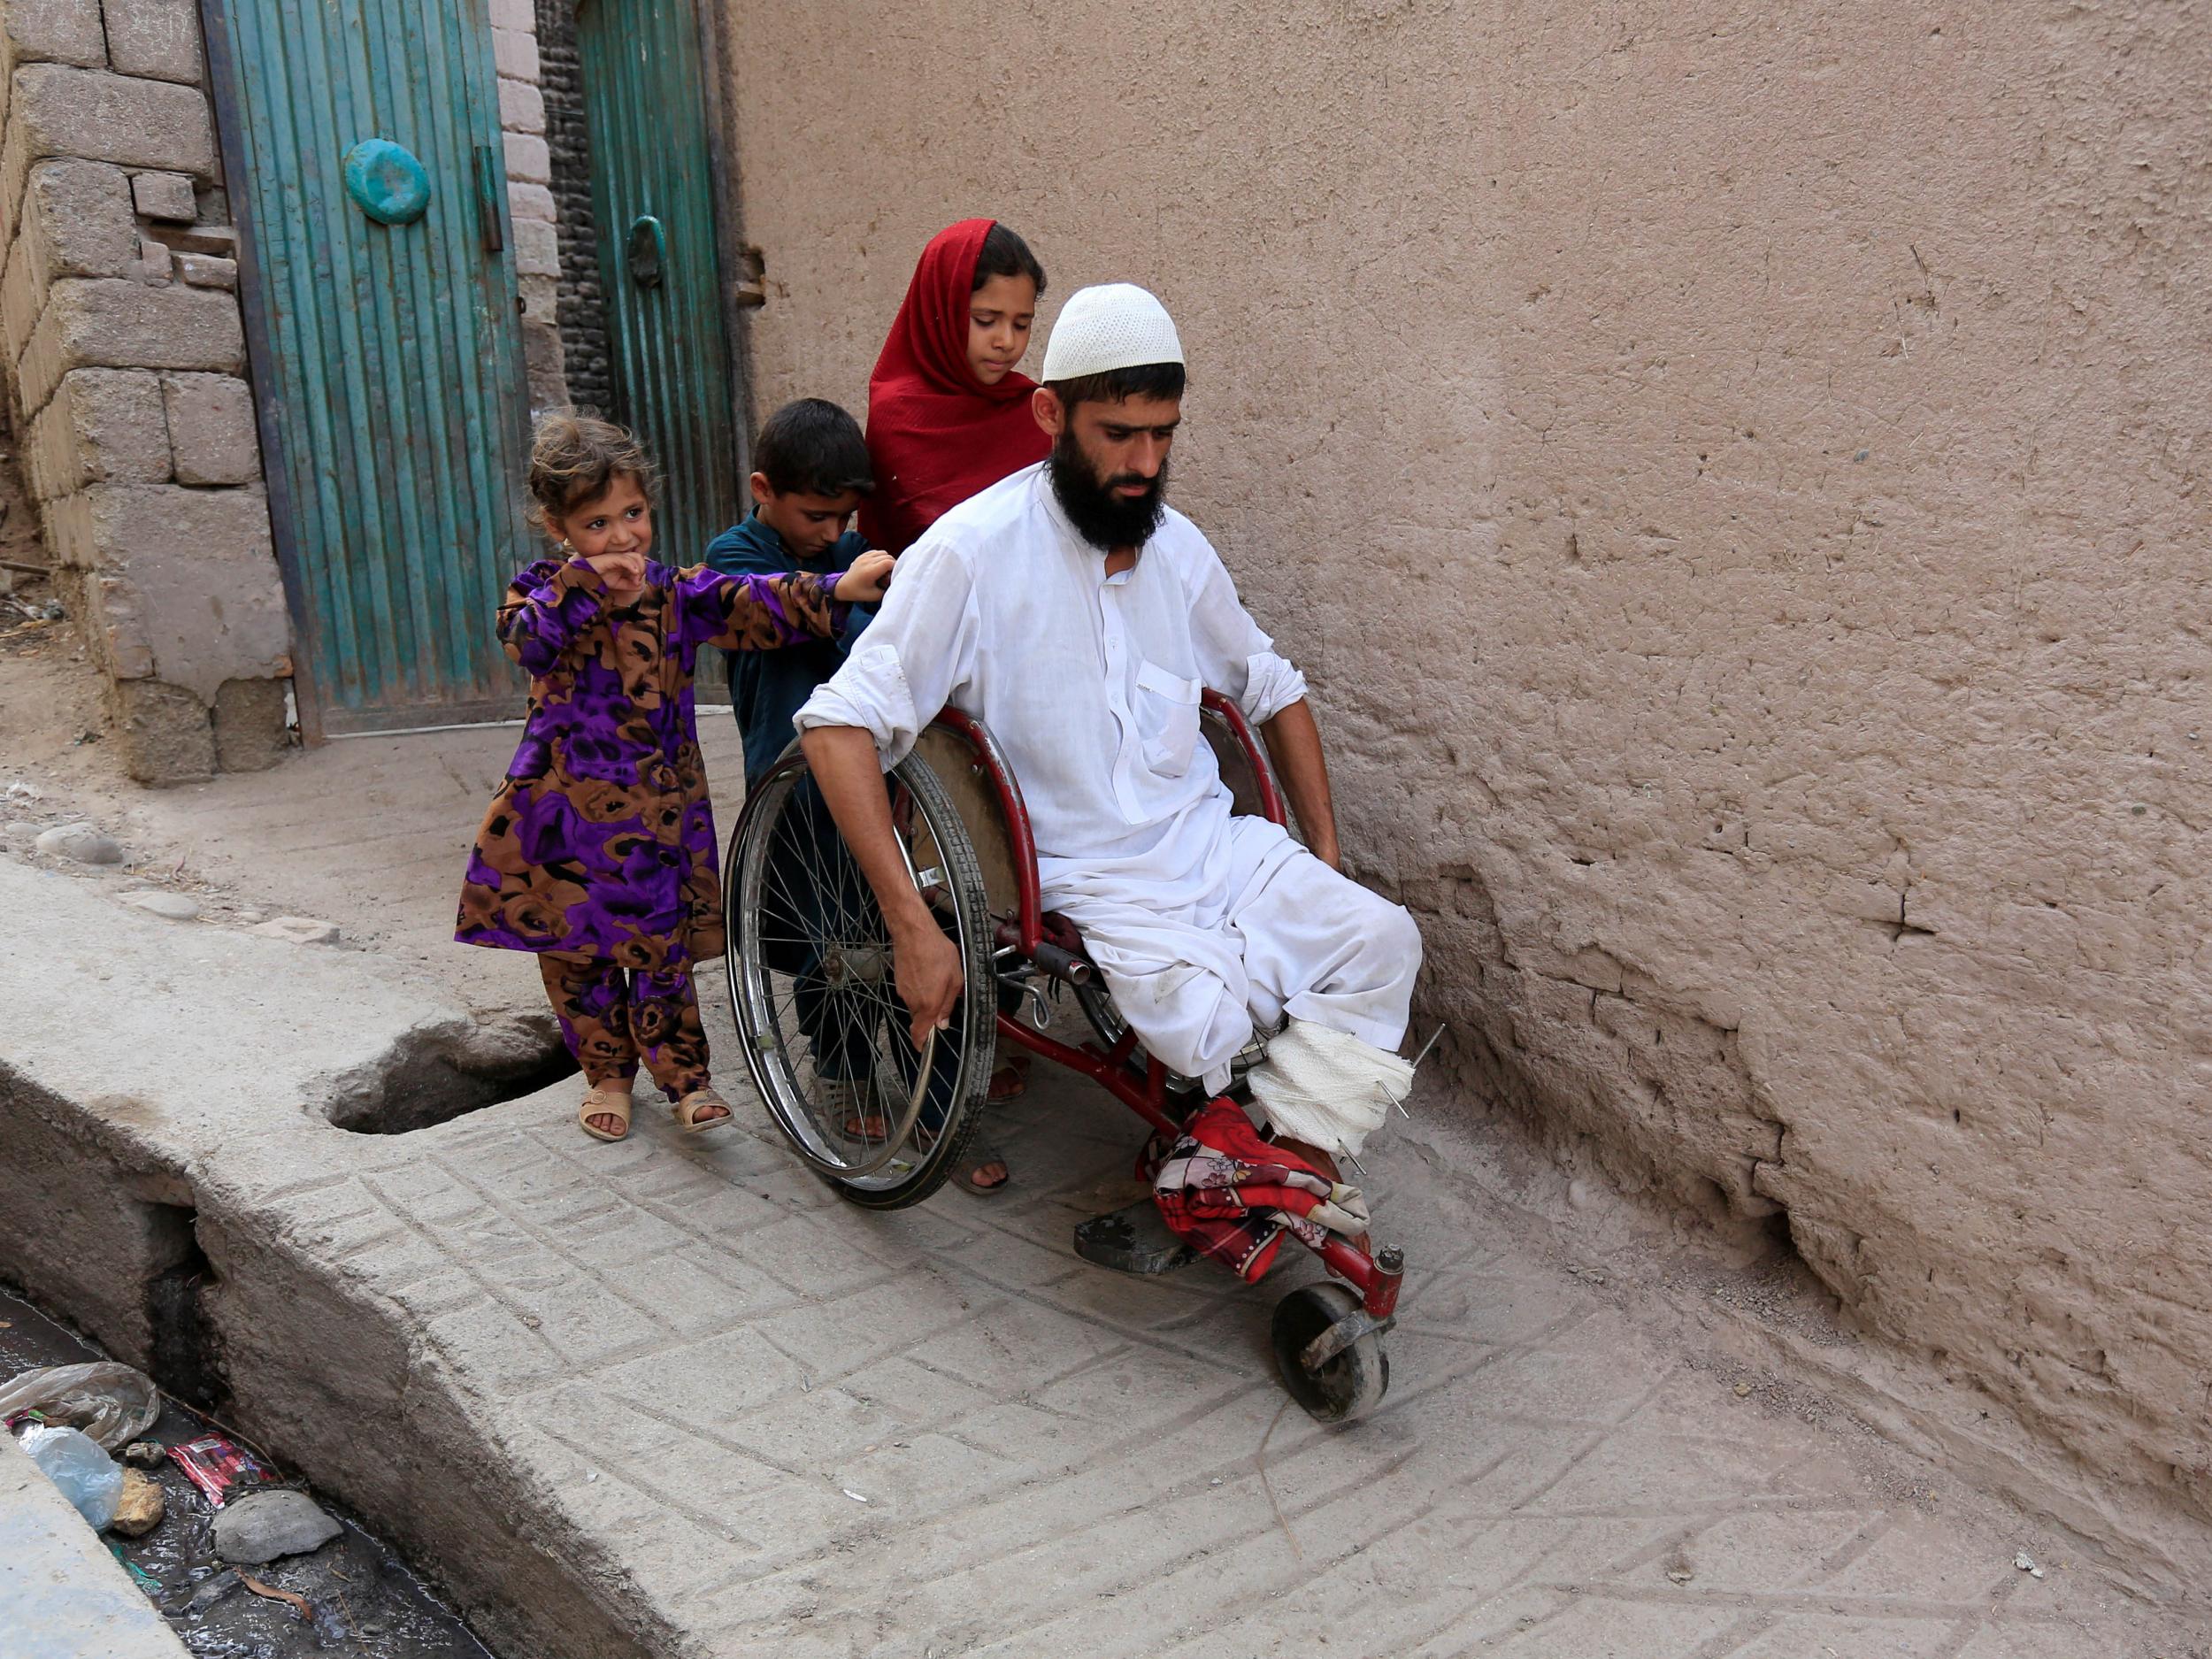 Mehrullah Safi, 28, a disabled Afghan National Army (ANA) soldier, leaves with his children from their house in Jalalabad province, Afghanistan